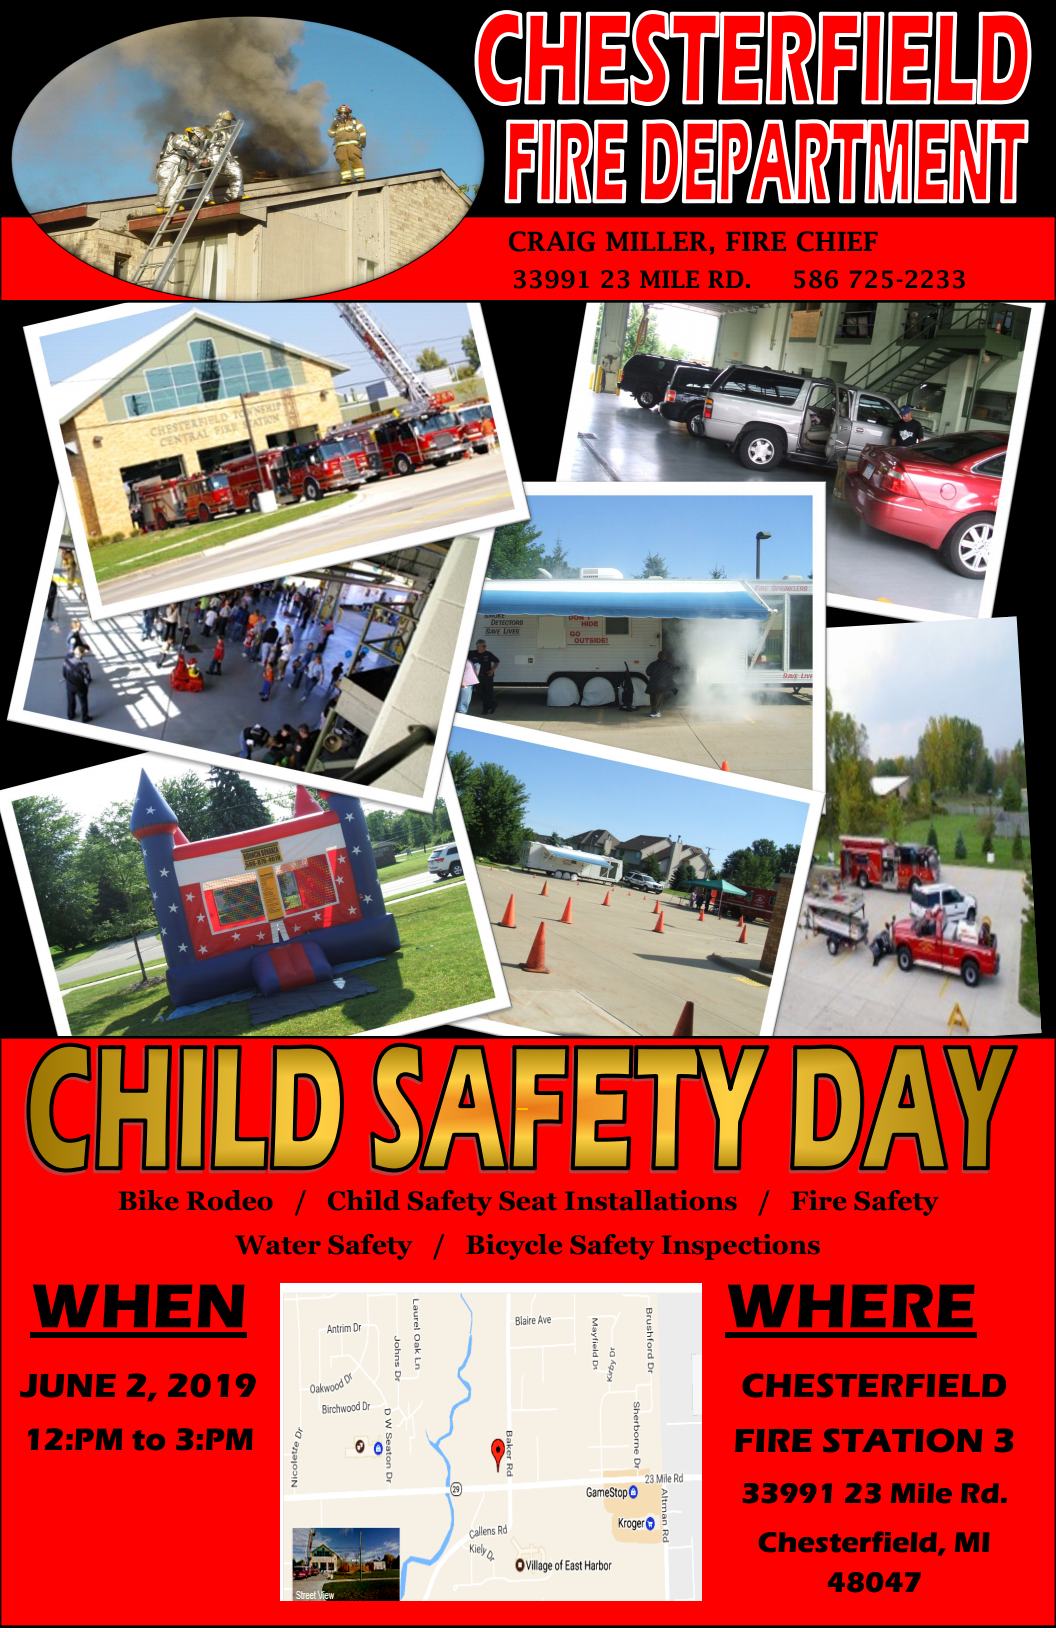 Child Safety Day – June 2nd 12PM-3PM